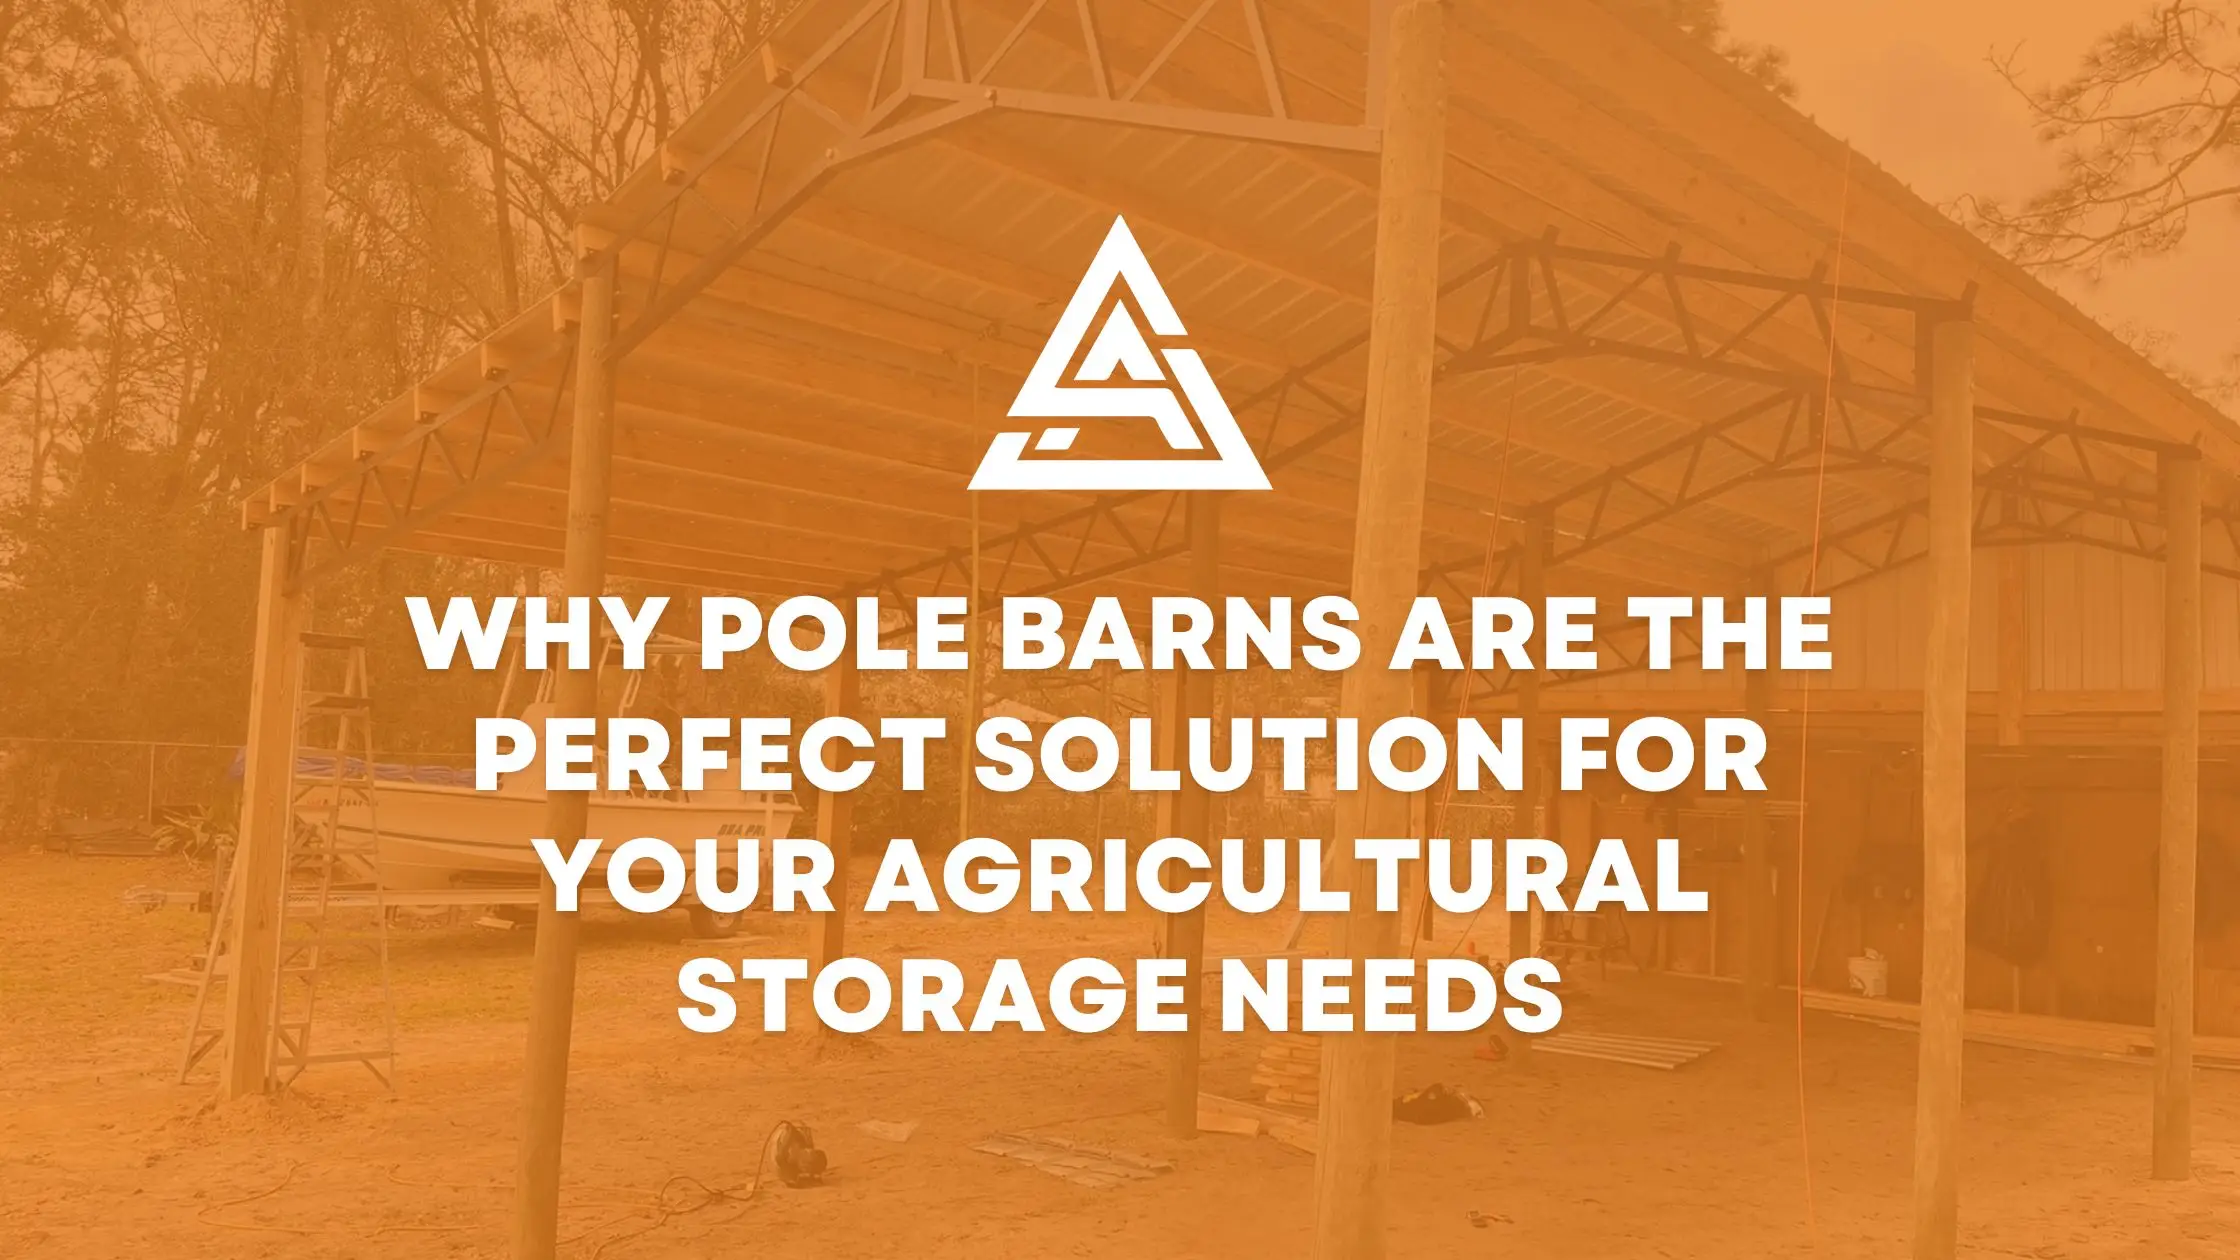 Why Pole Barns are the Perfect Solution for Your Agricultural Storage Needs